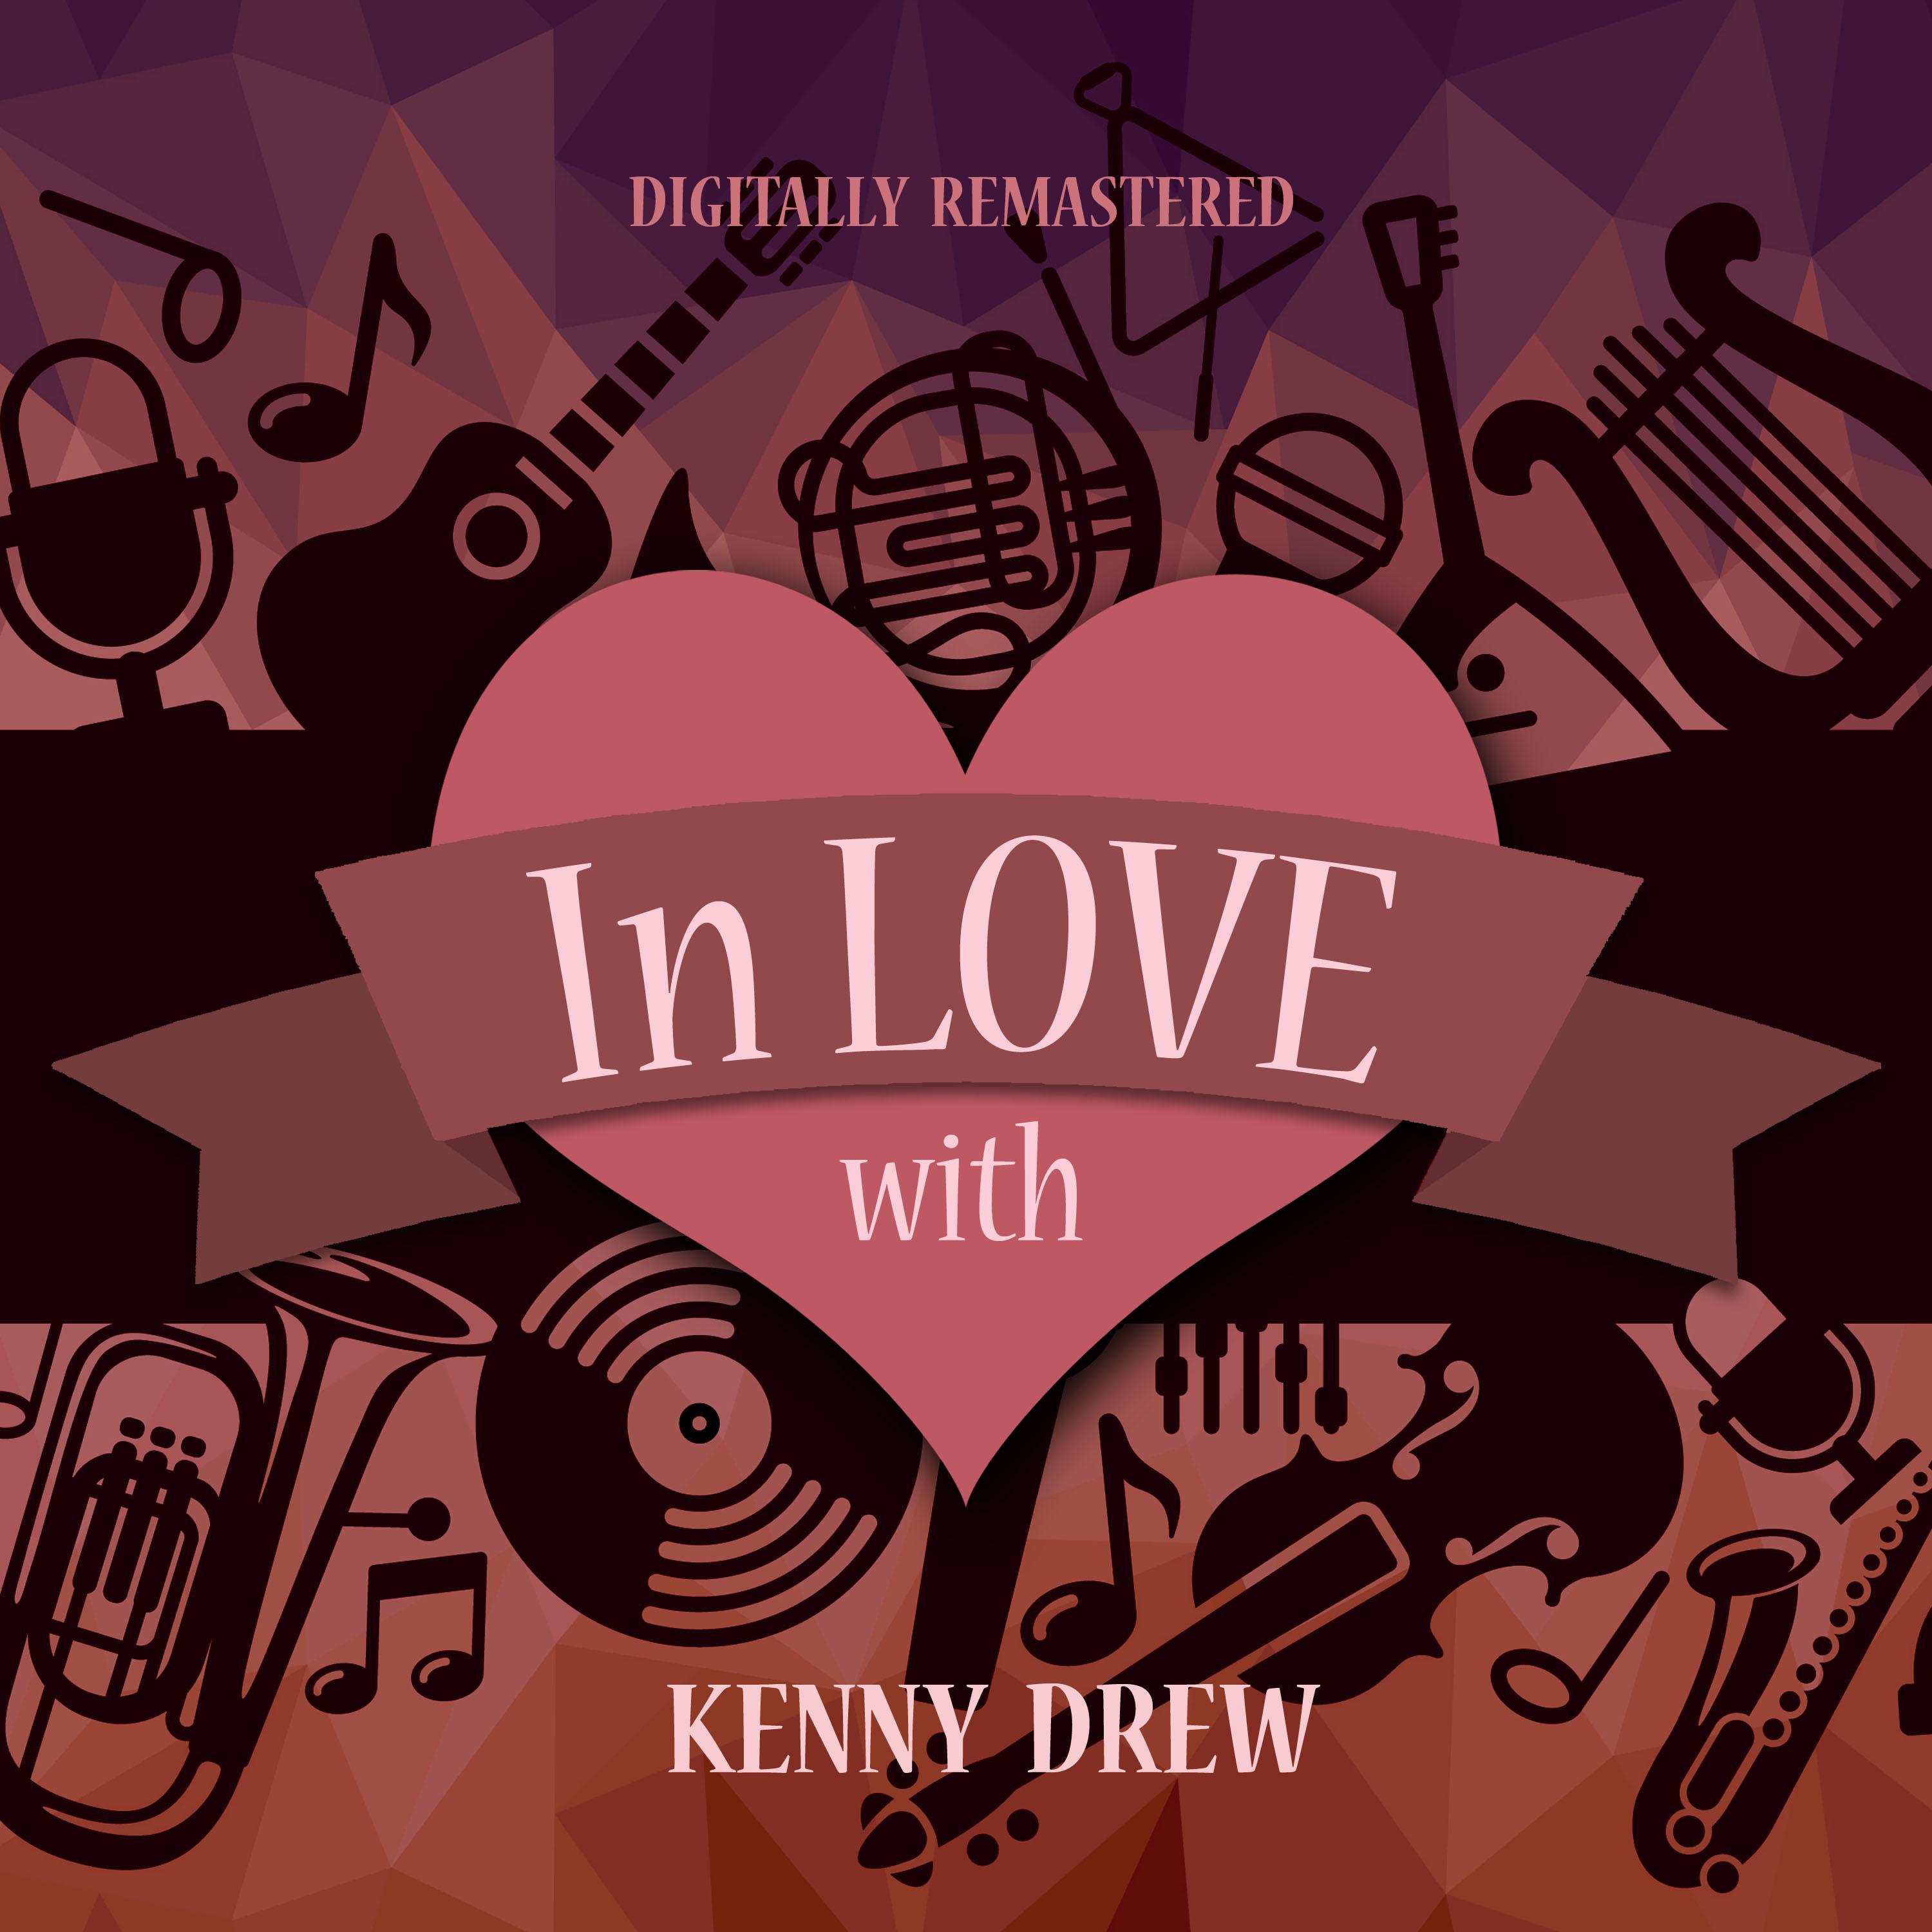 In Love with Kenny Drew (Digitally Remastered)